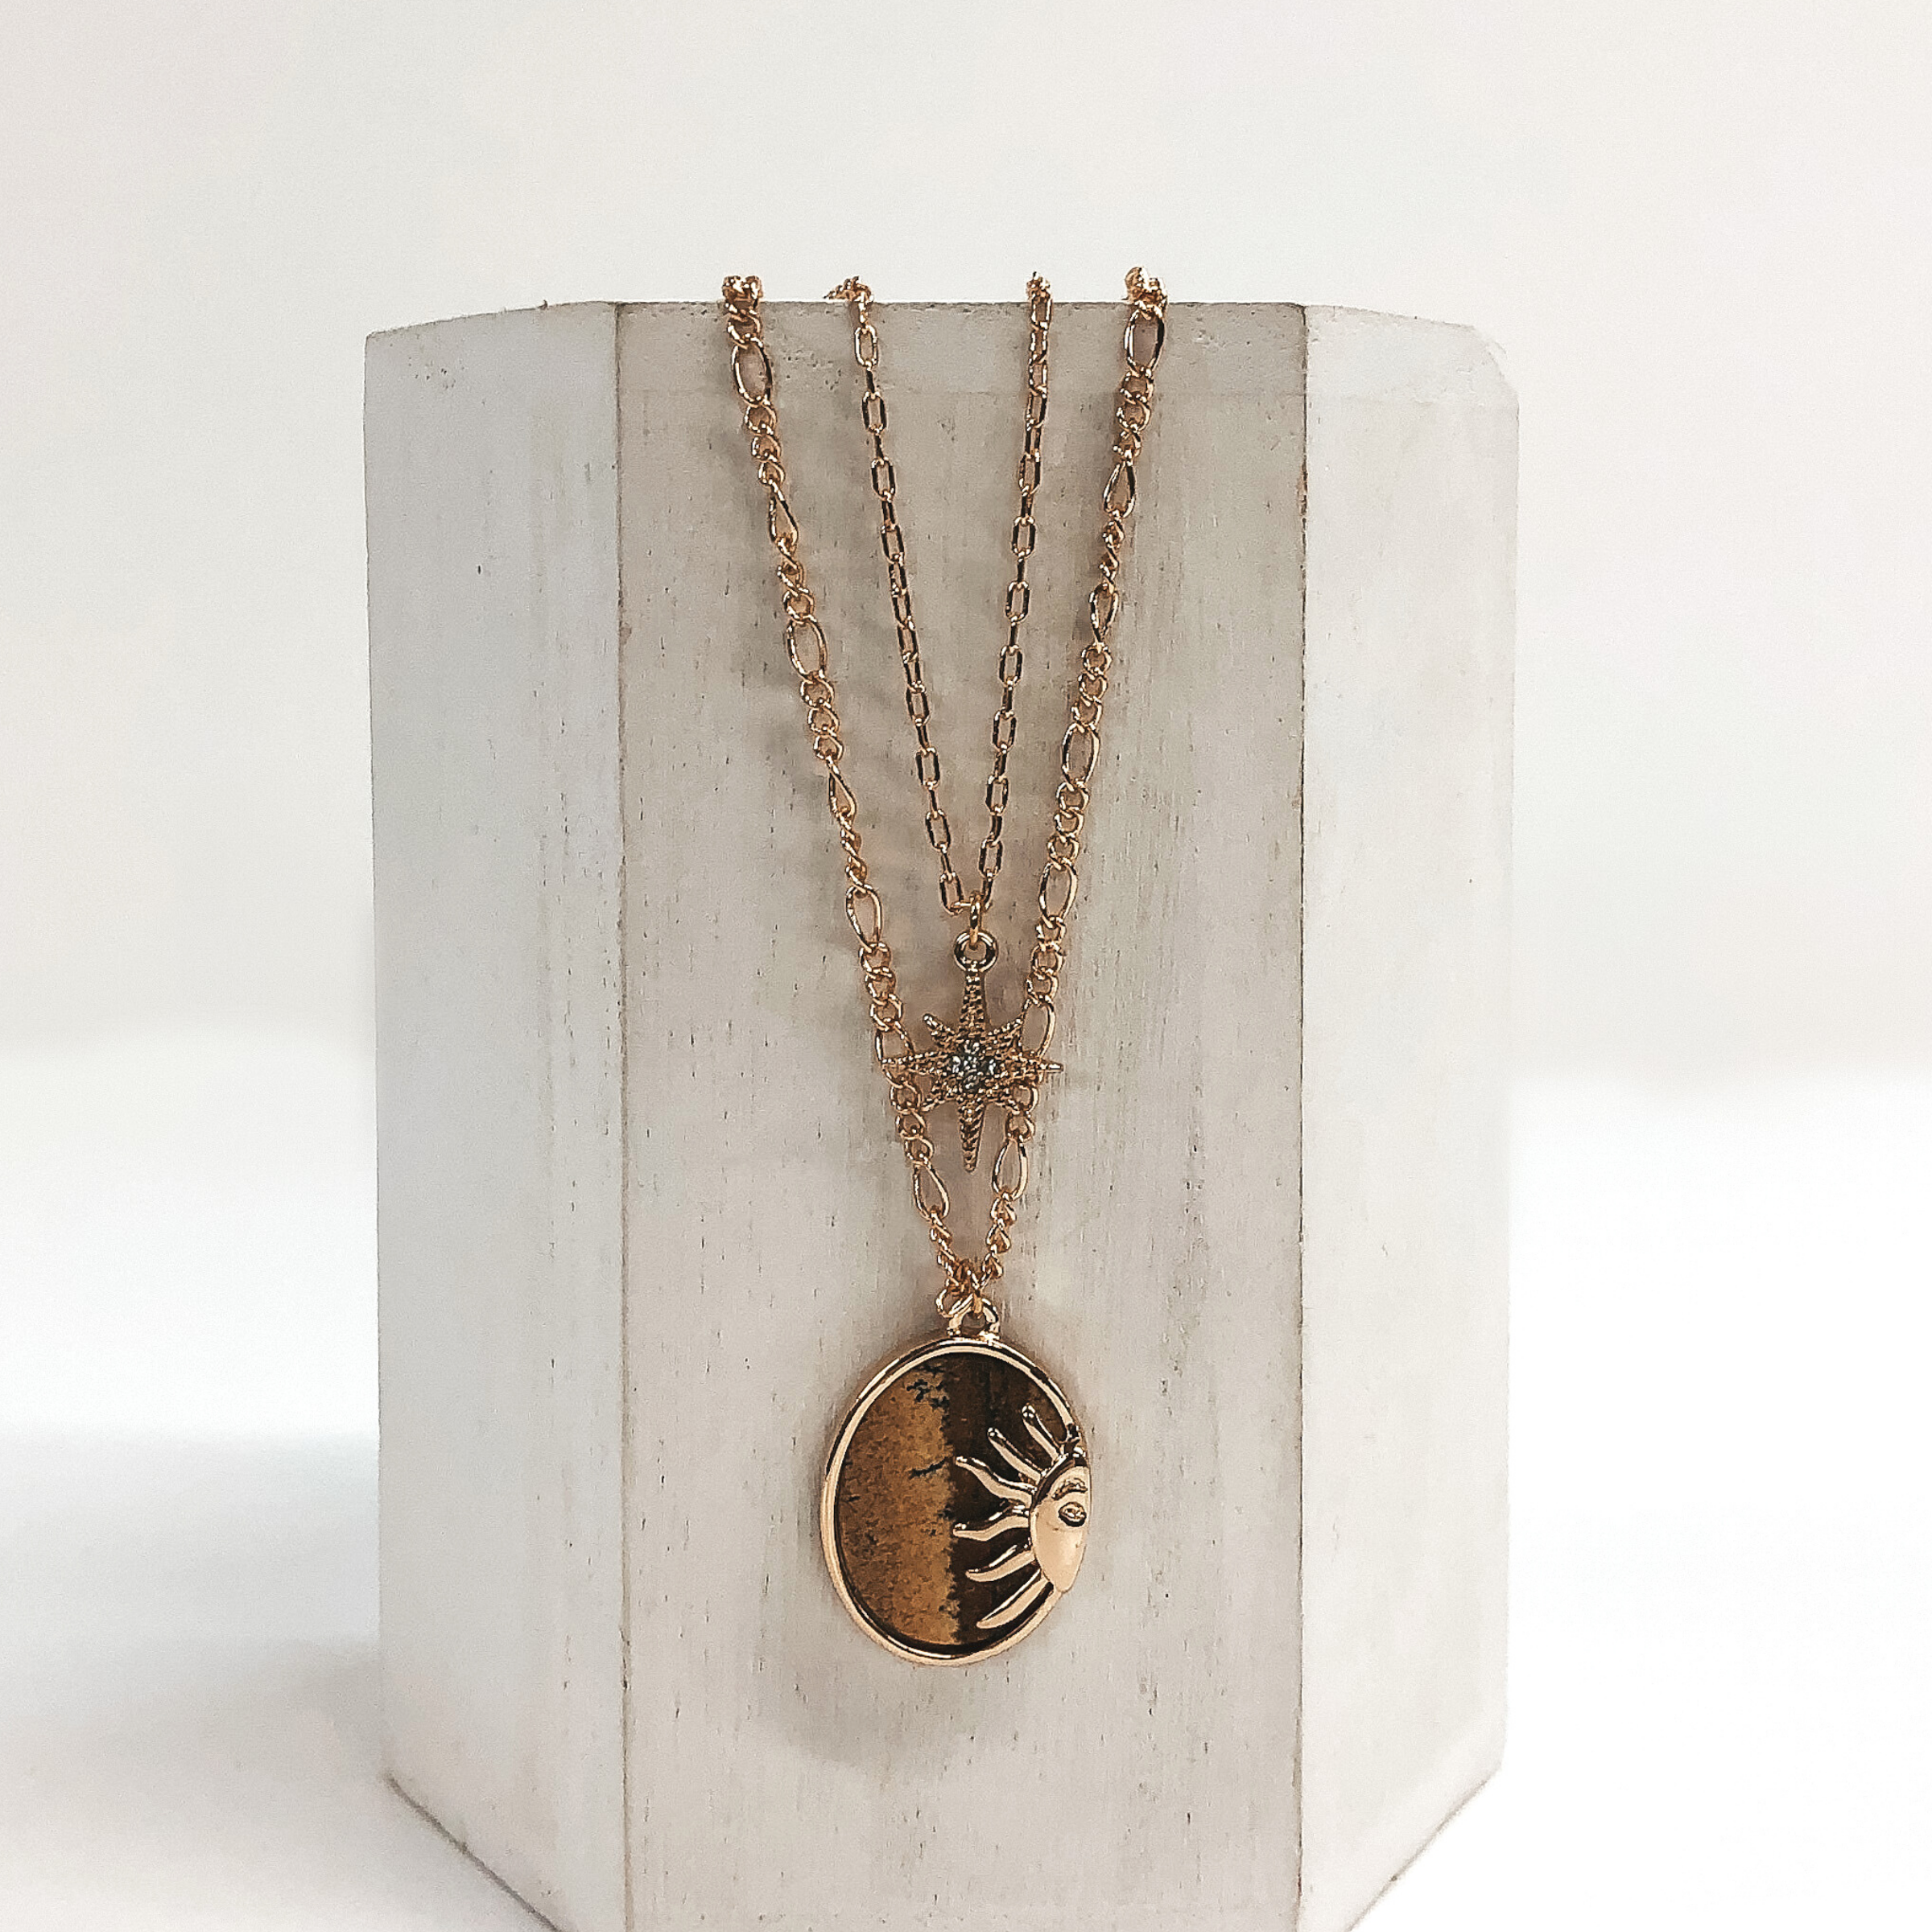 Double layered chain necklace in gold. The shorter strand has a gold star pendant with a center clear crystal and the longer strand has an oval tan stone pendant with a half sun gold charm. This necklace is pictured hanging on a white block on a white background. 